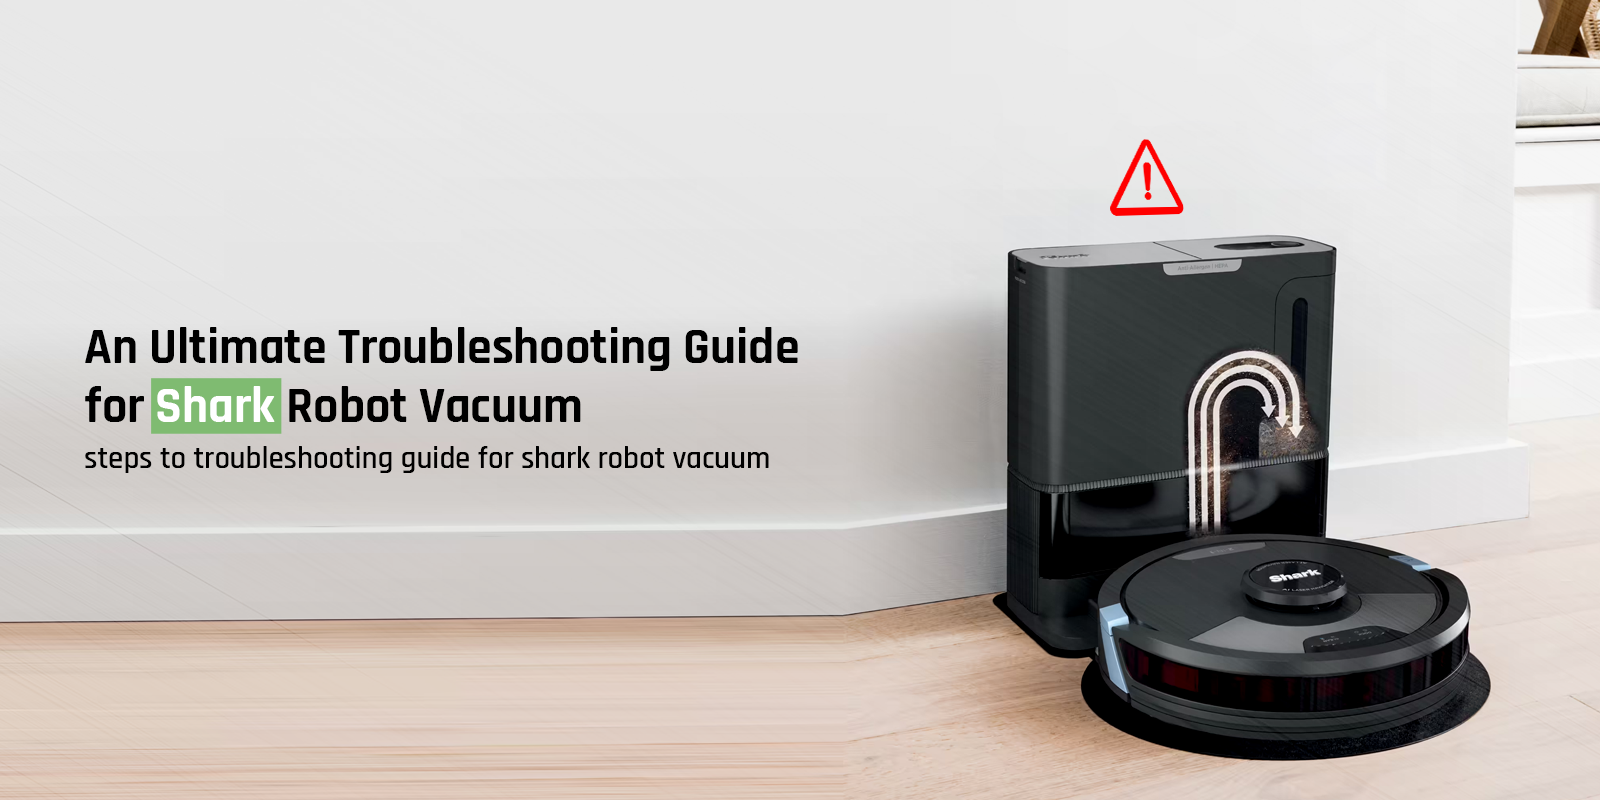 shark-robot-vacuum-troubleshooting-an-ultimate-guide